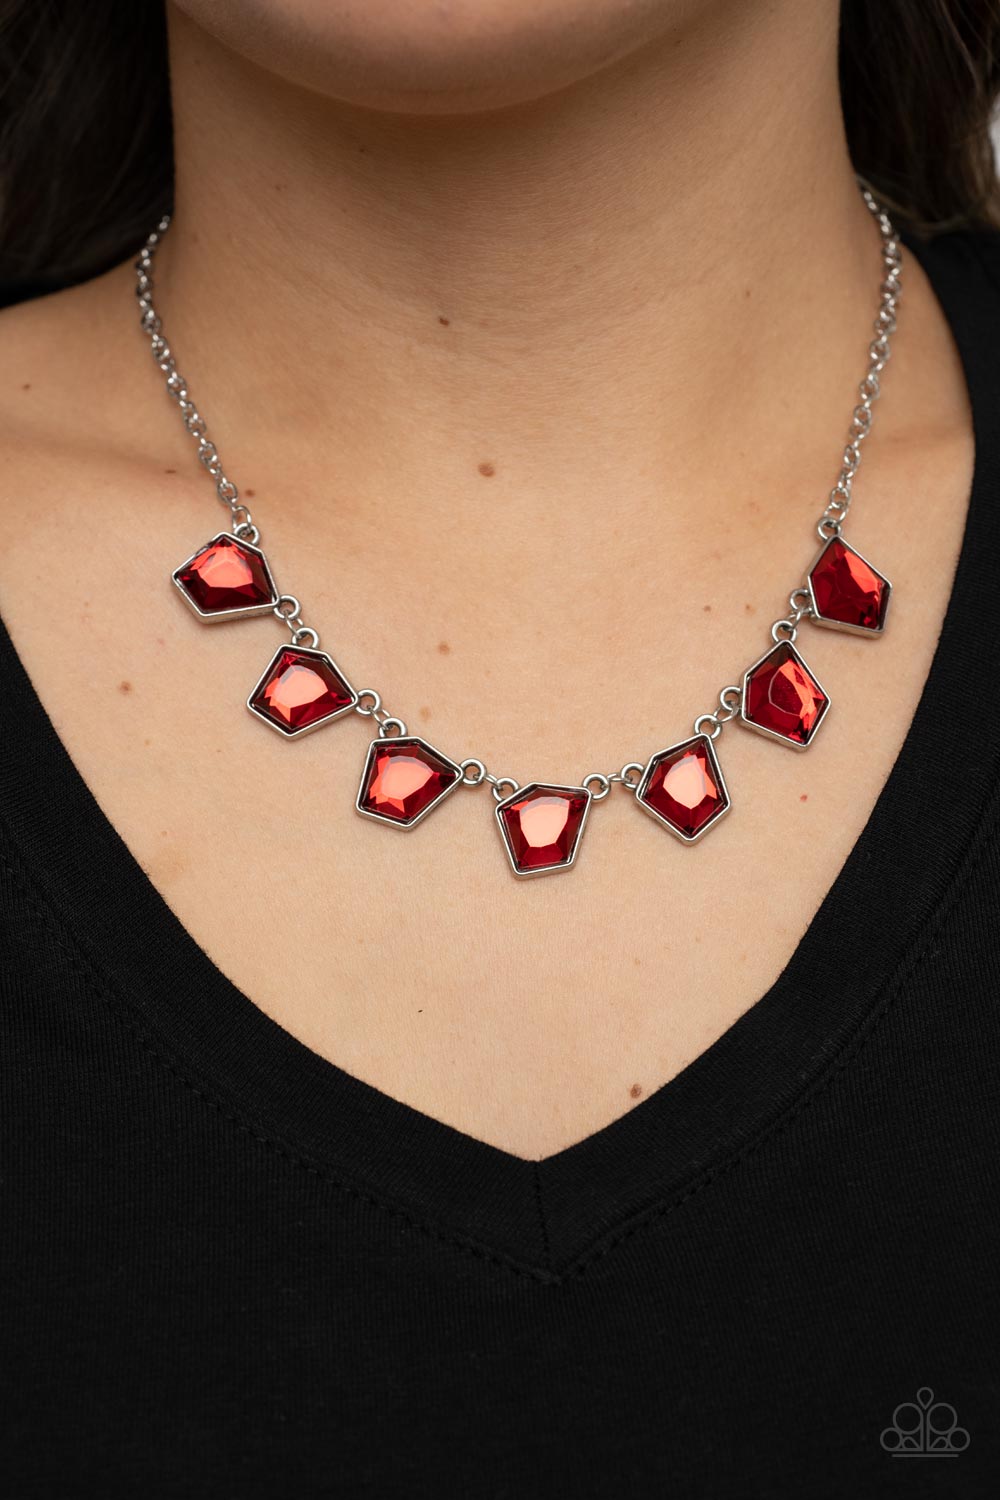 Experimental Edge Red Rhinestone Necklace - Paparazzi Accessories-on model - CarasShop.com - $5 Jewelry by Cara Jewels